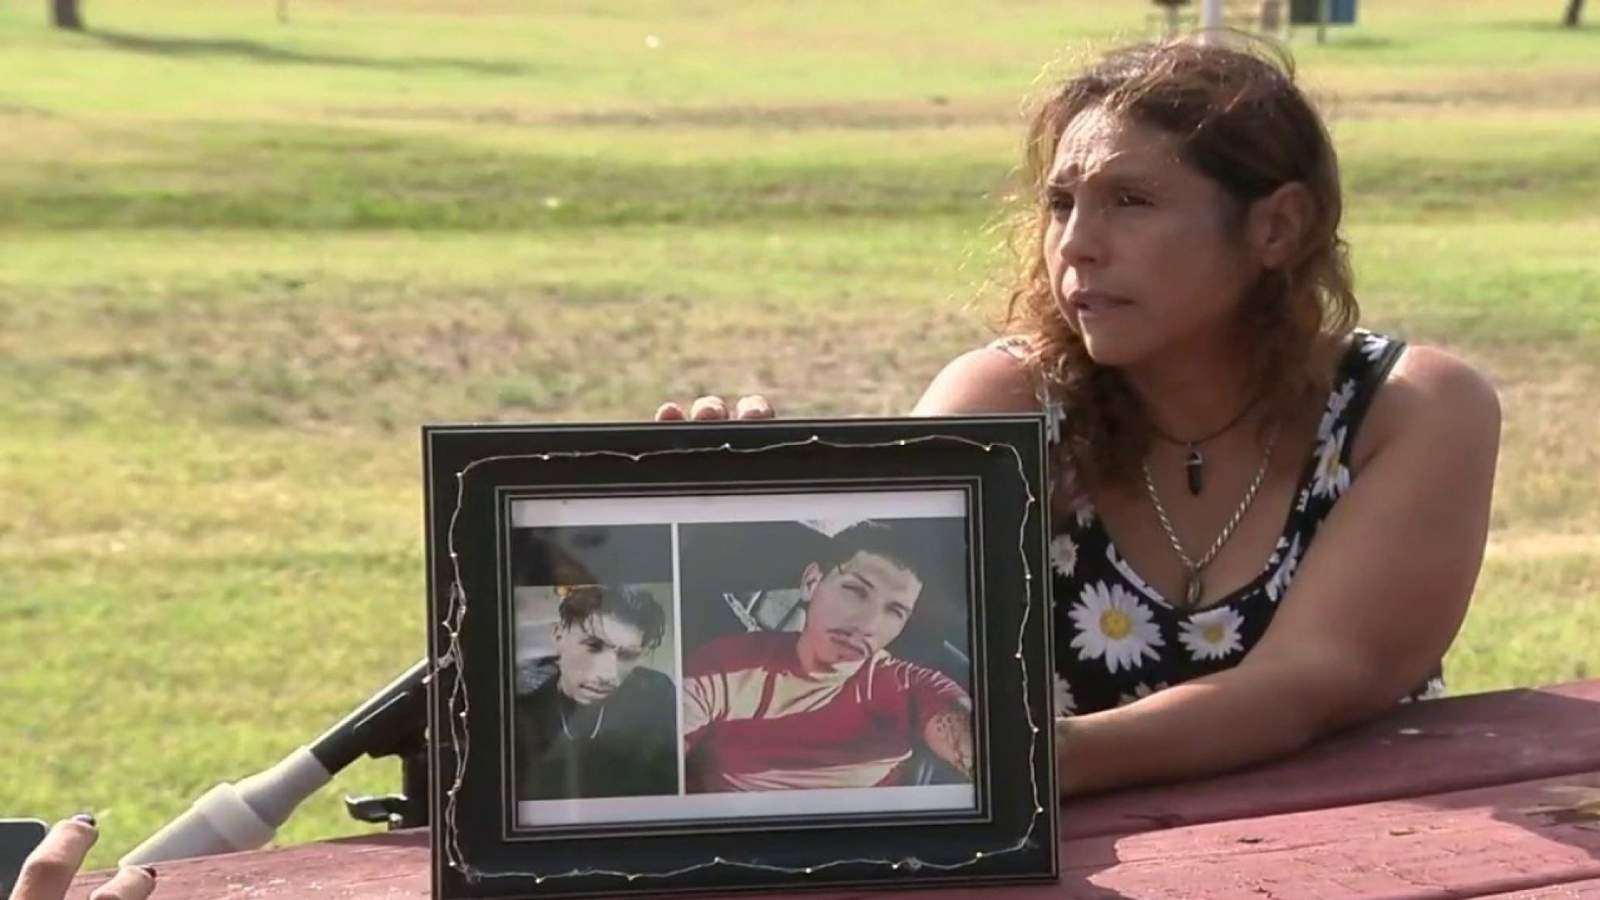 ‘I’m not supposed to be burying my child,’ says mother of San Antonio murder victim